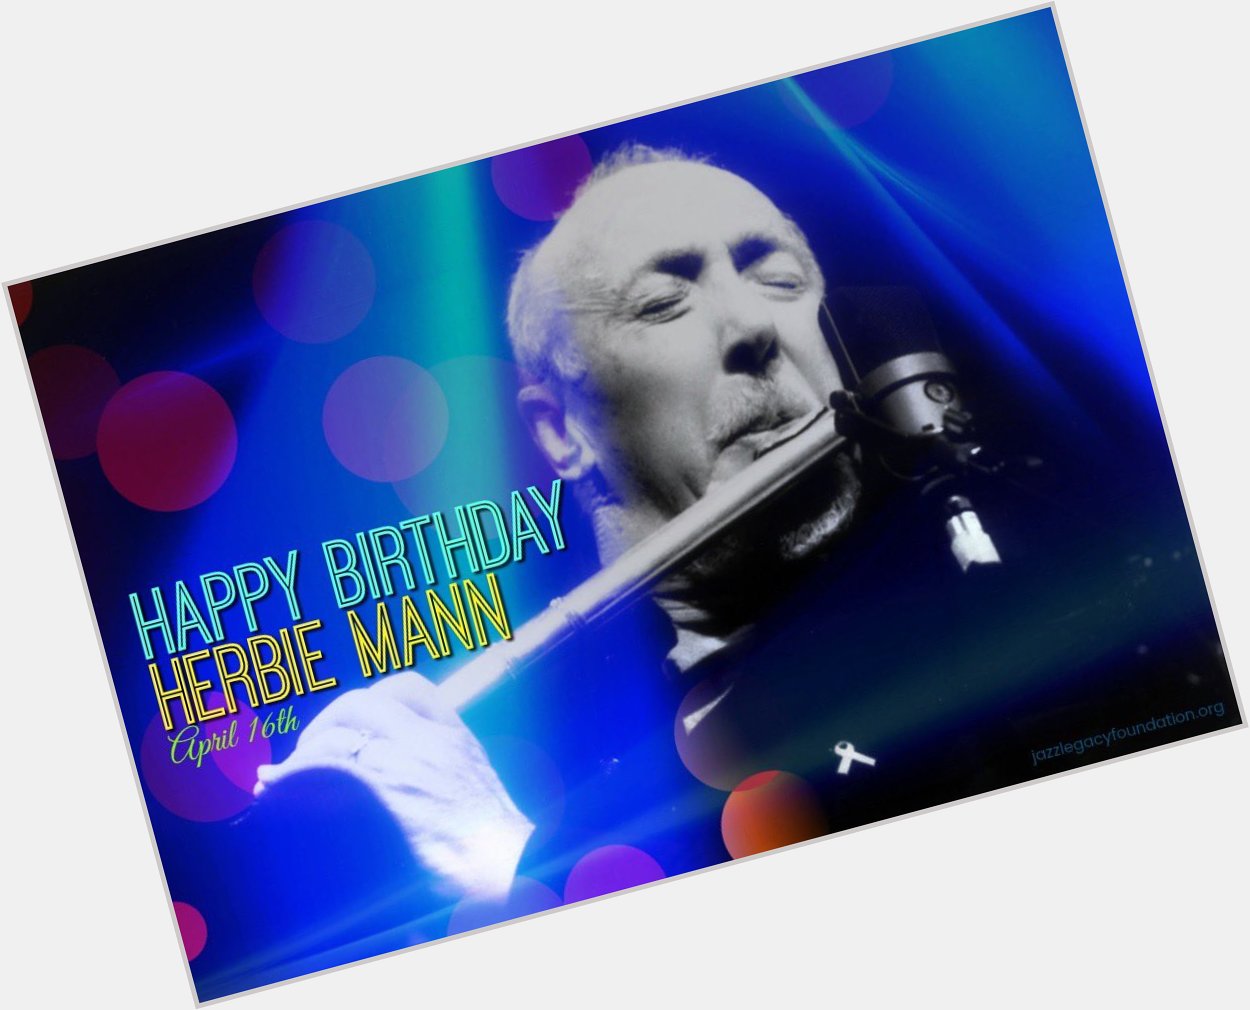 Happy Birthday to the late great Herbie Mann! 